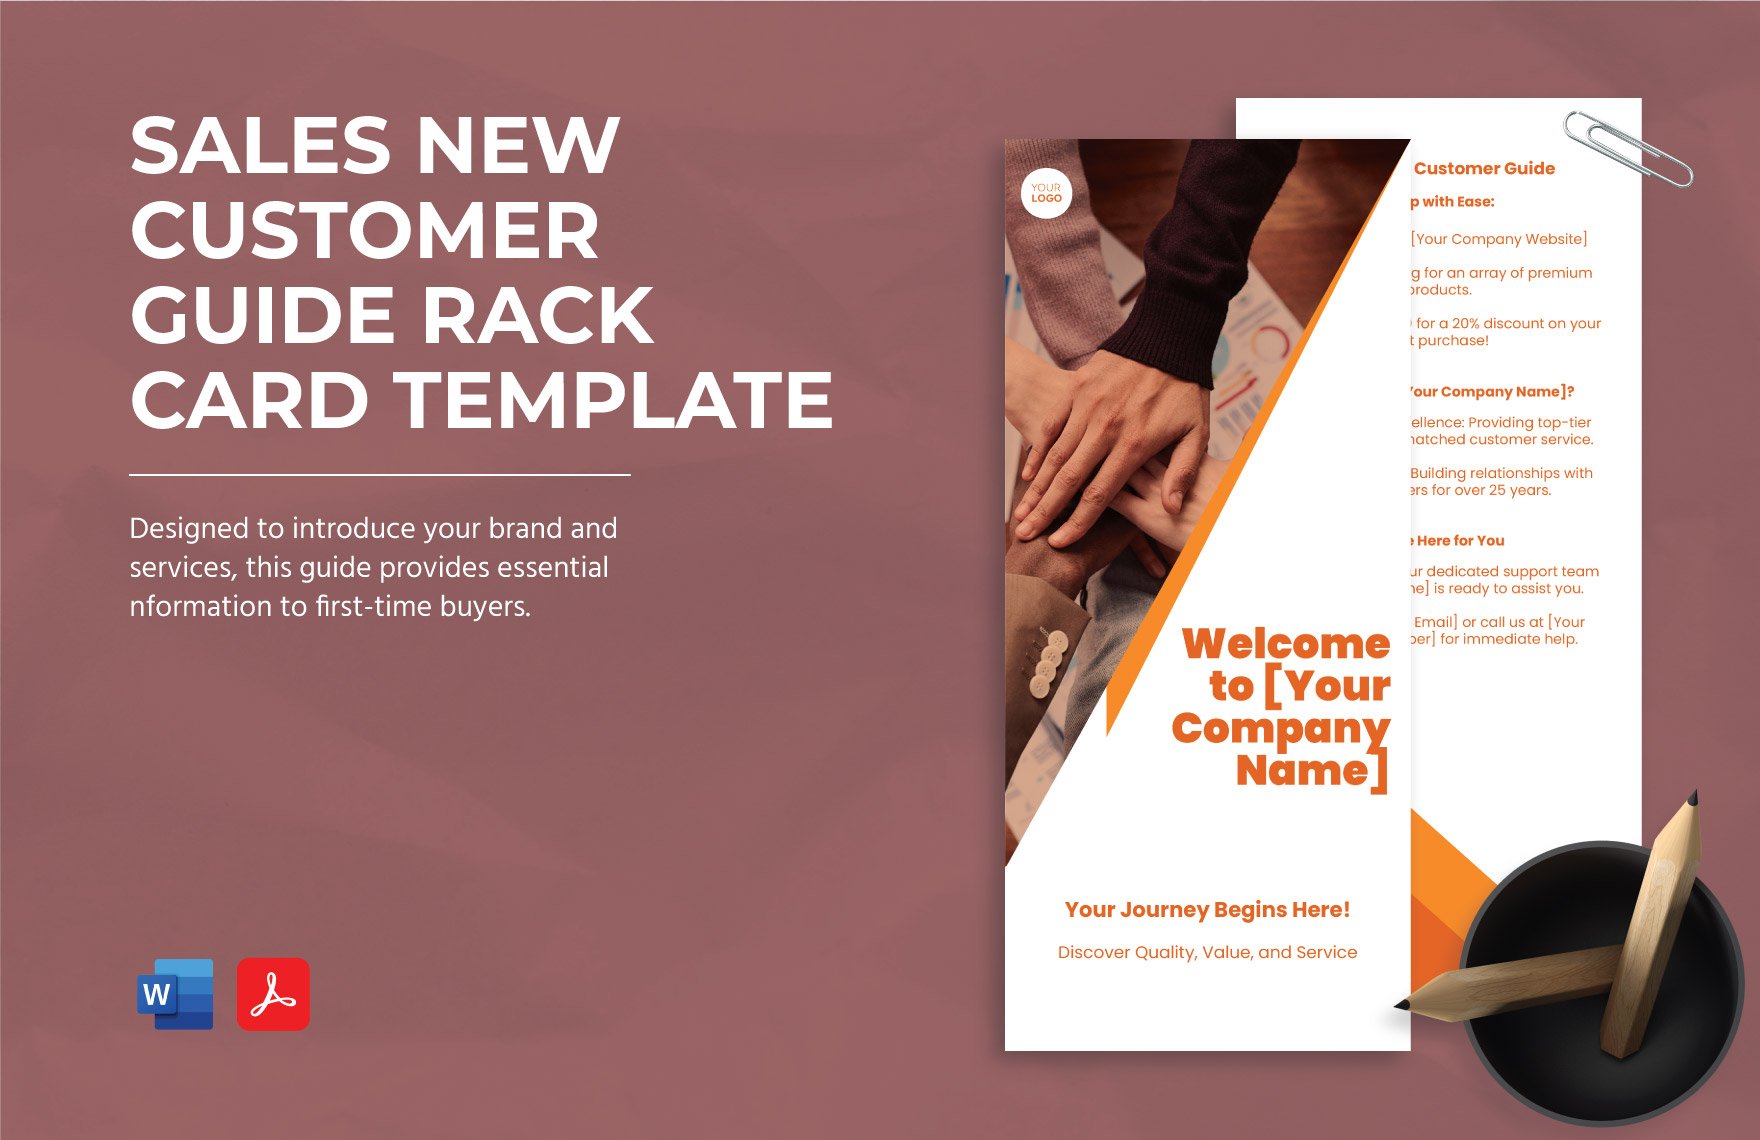 Sales New Customer Guide Rack Card Template